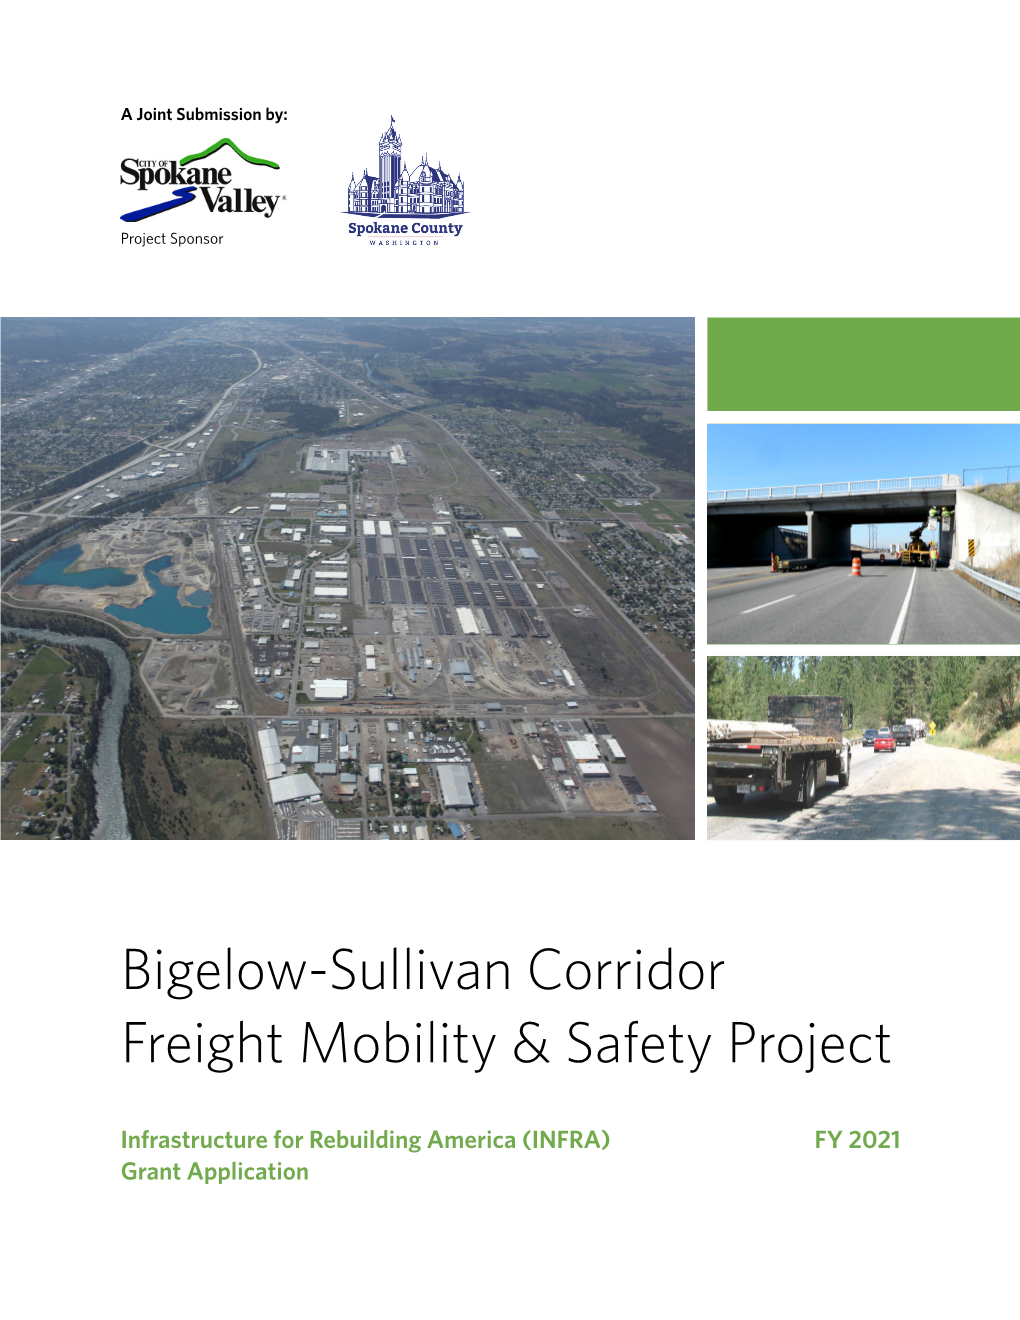 Bigelow-Sullivan Corridor Freight Mobility & Safety Project